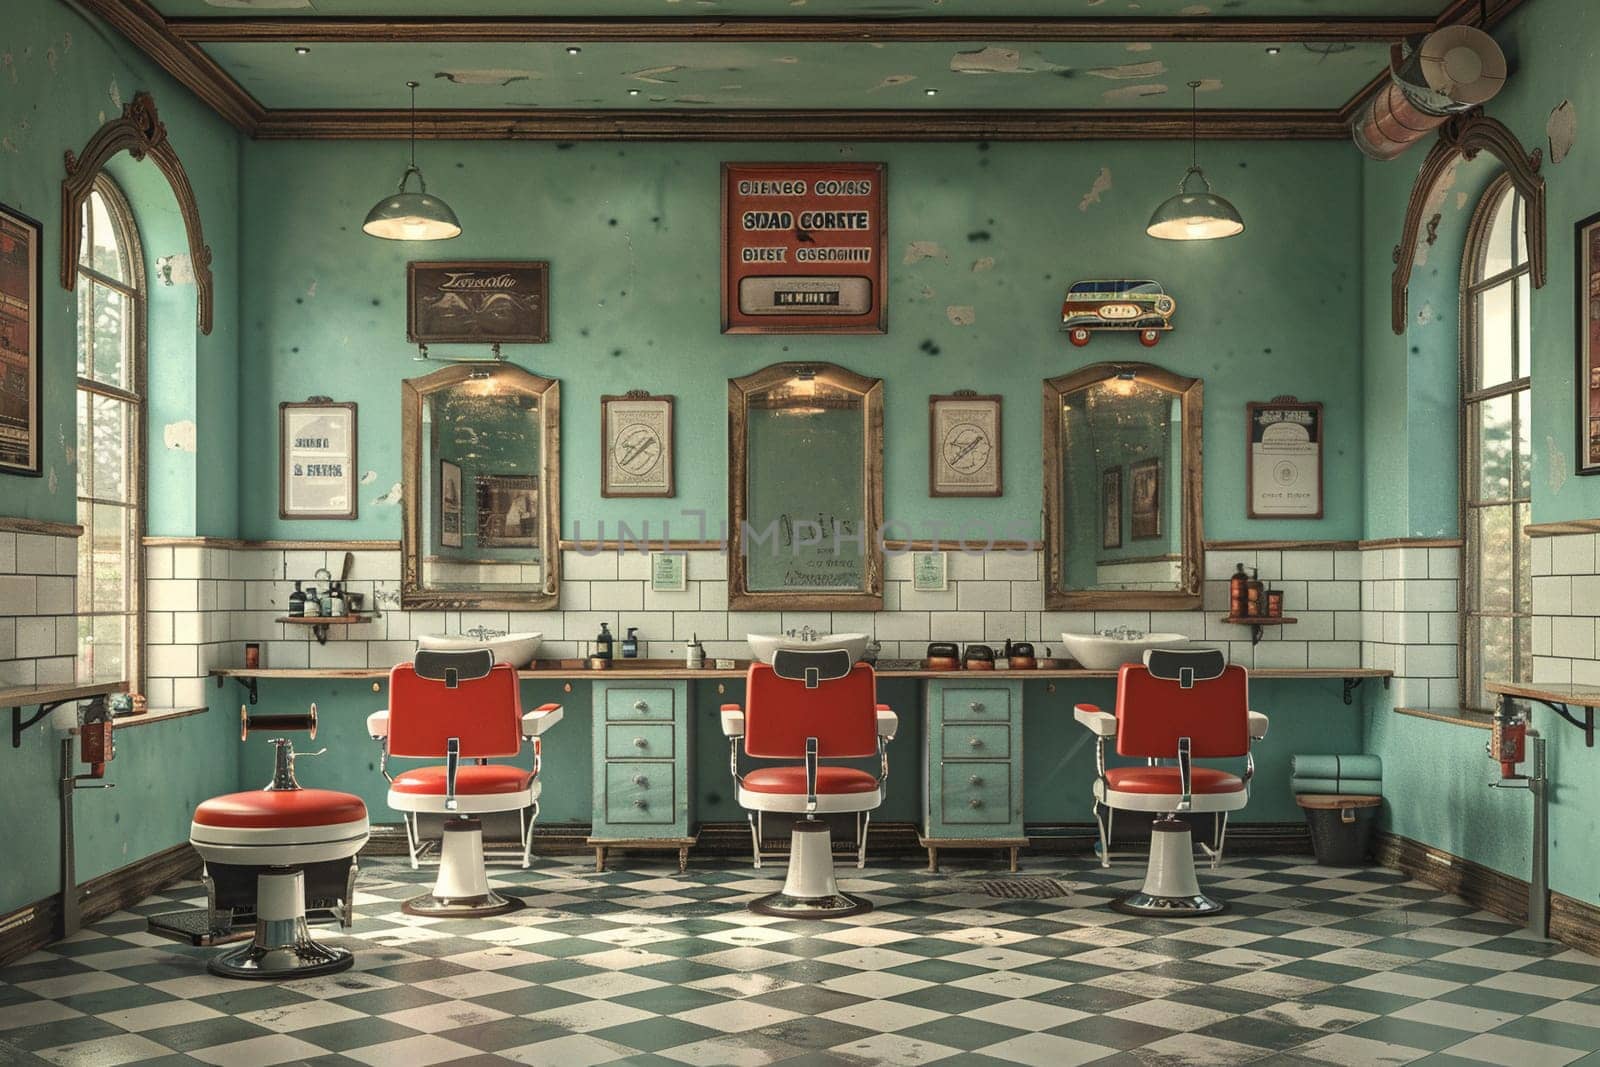 Vintage barbershop interior with classic chairs and nostalgic decorHyperrealistic